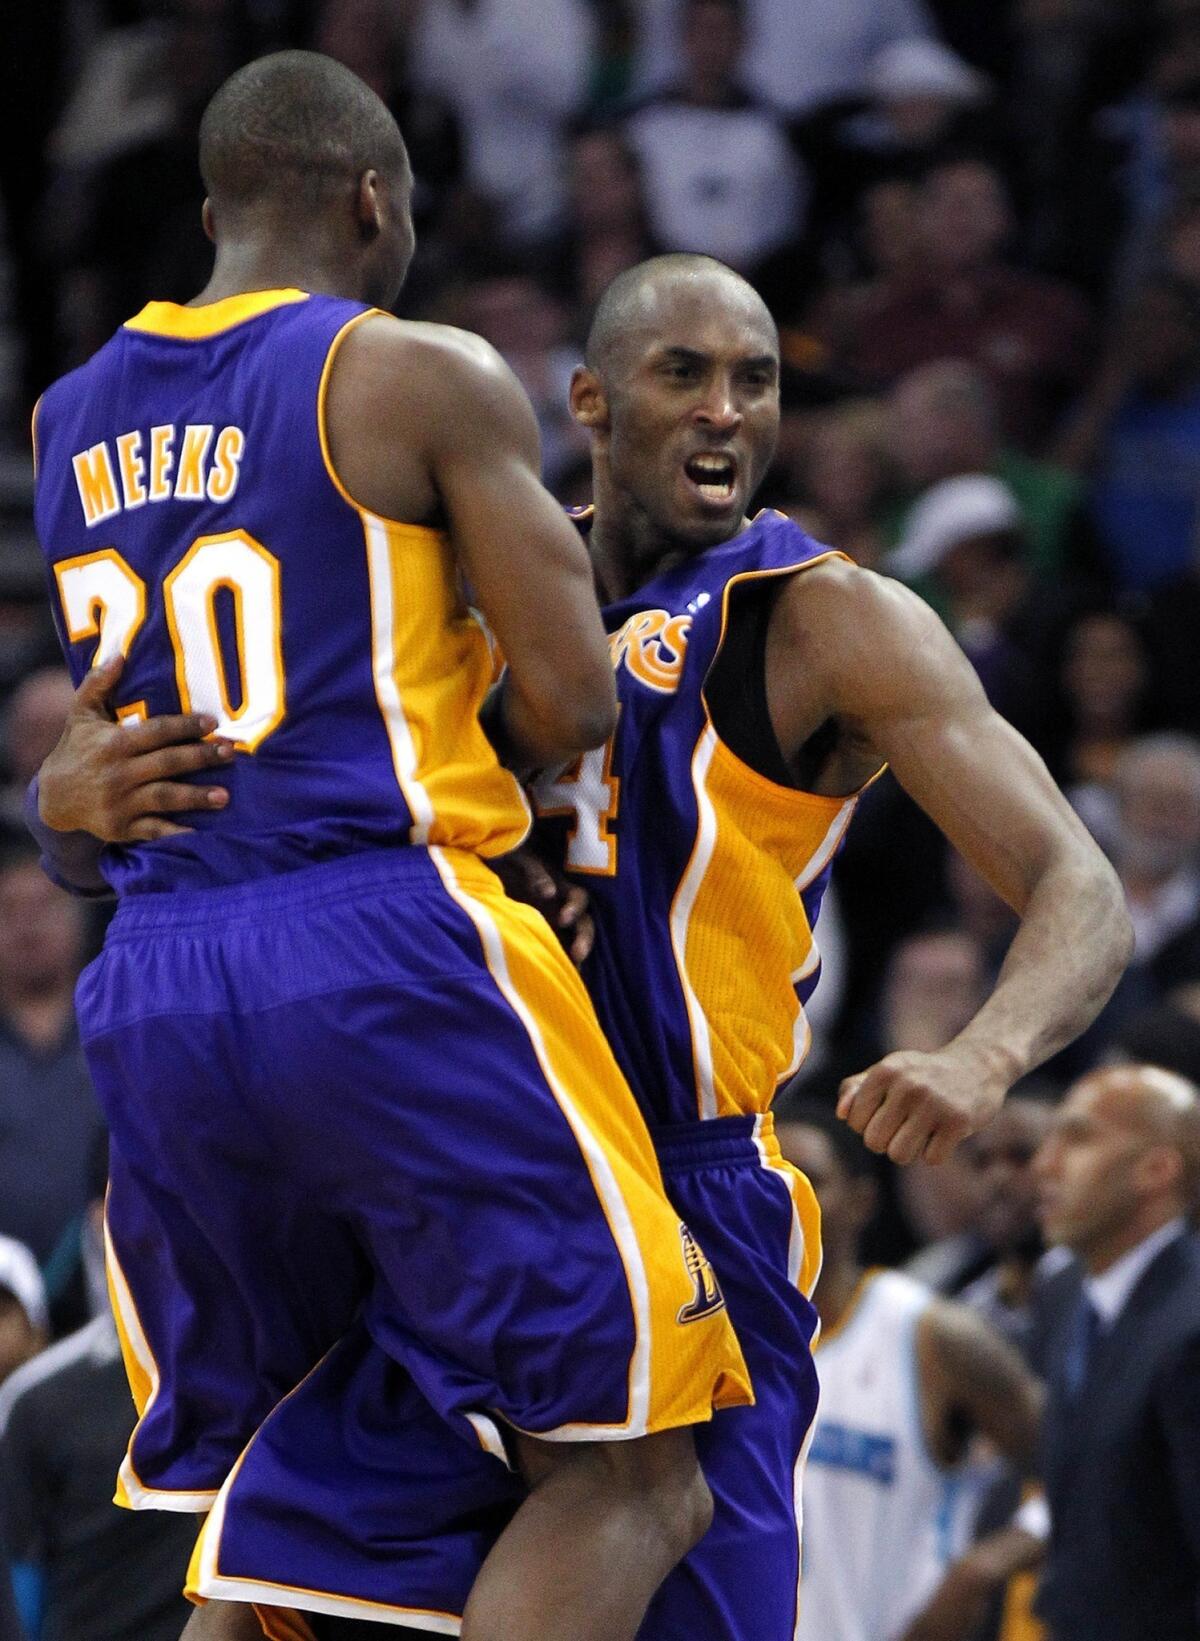 Lakers guard Kobe Bryant celebrates with teammate Jodie Meeks after his breakaway dunk against the New Orleans Hornets.